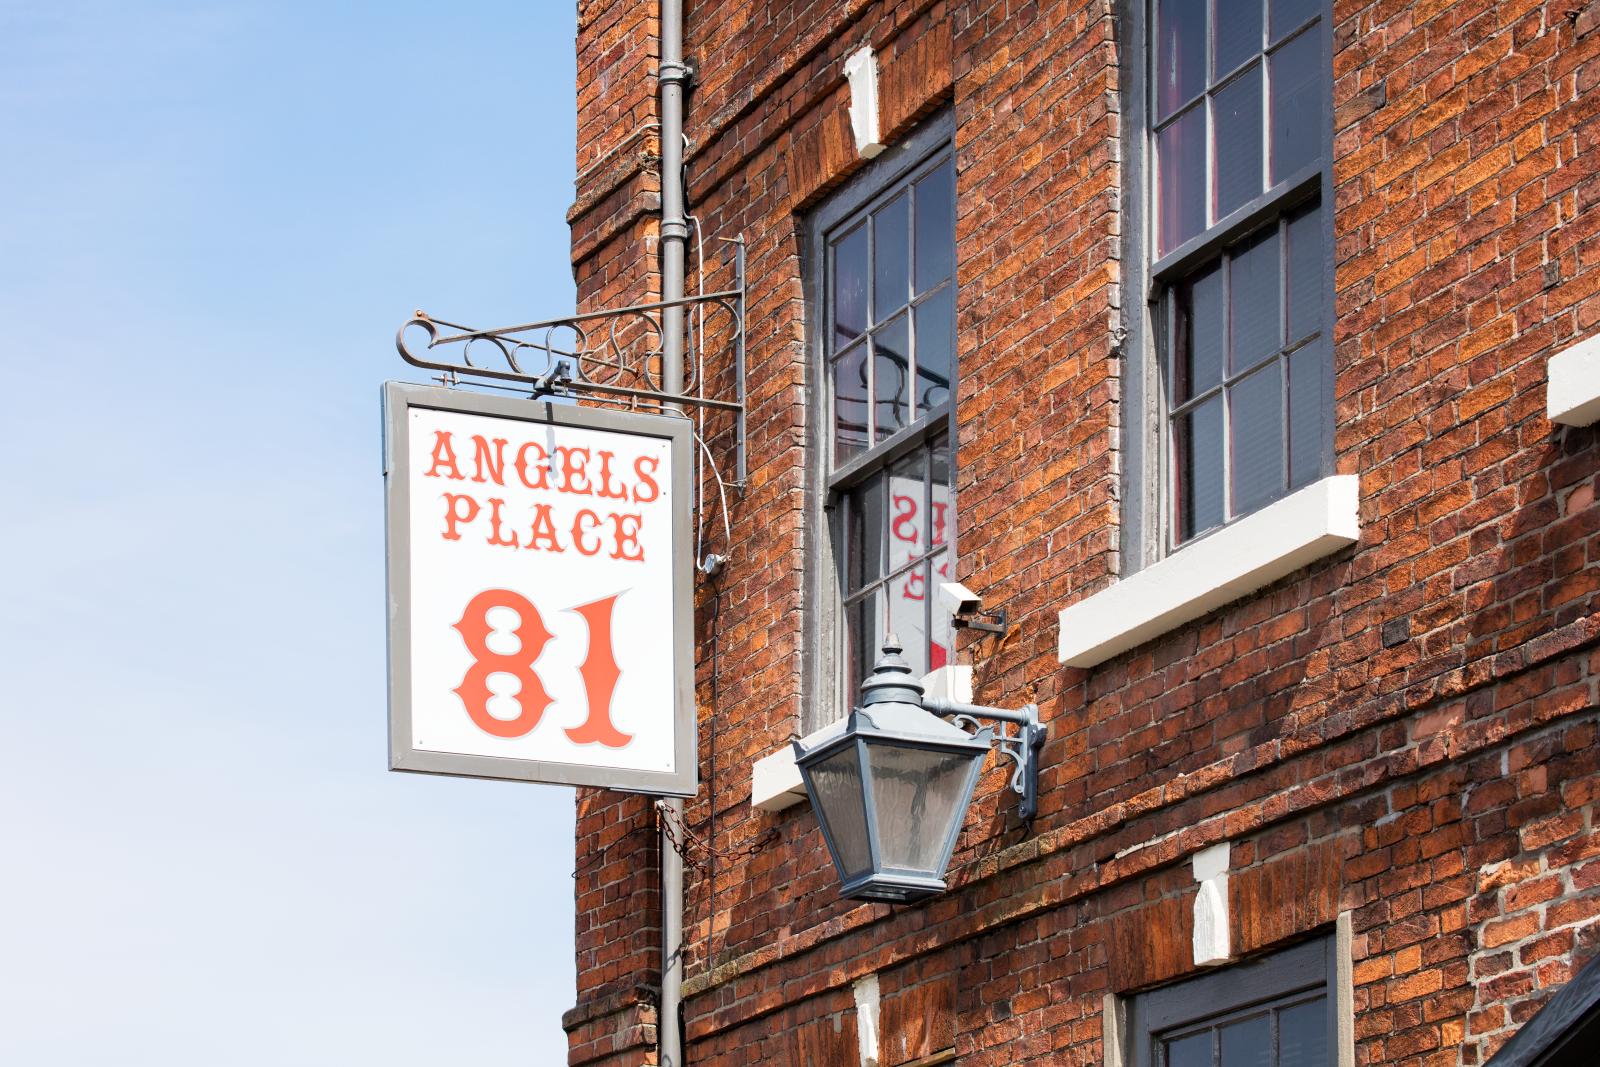 Signage on the side of a building which reads 'Angels Place 81'.